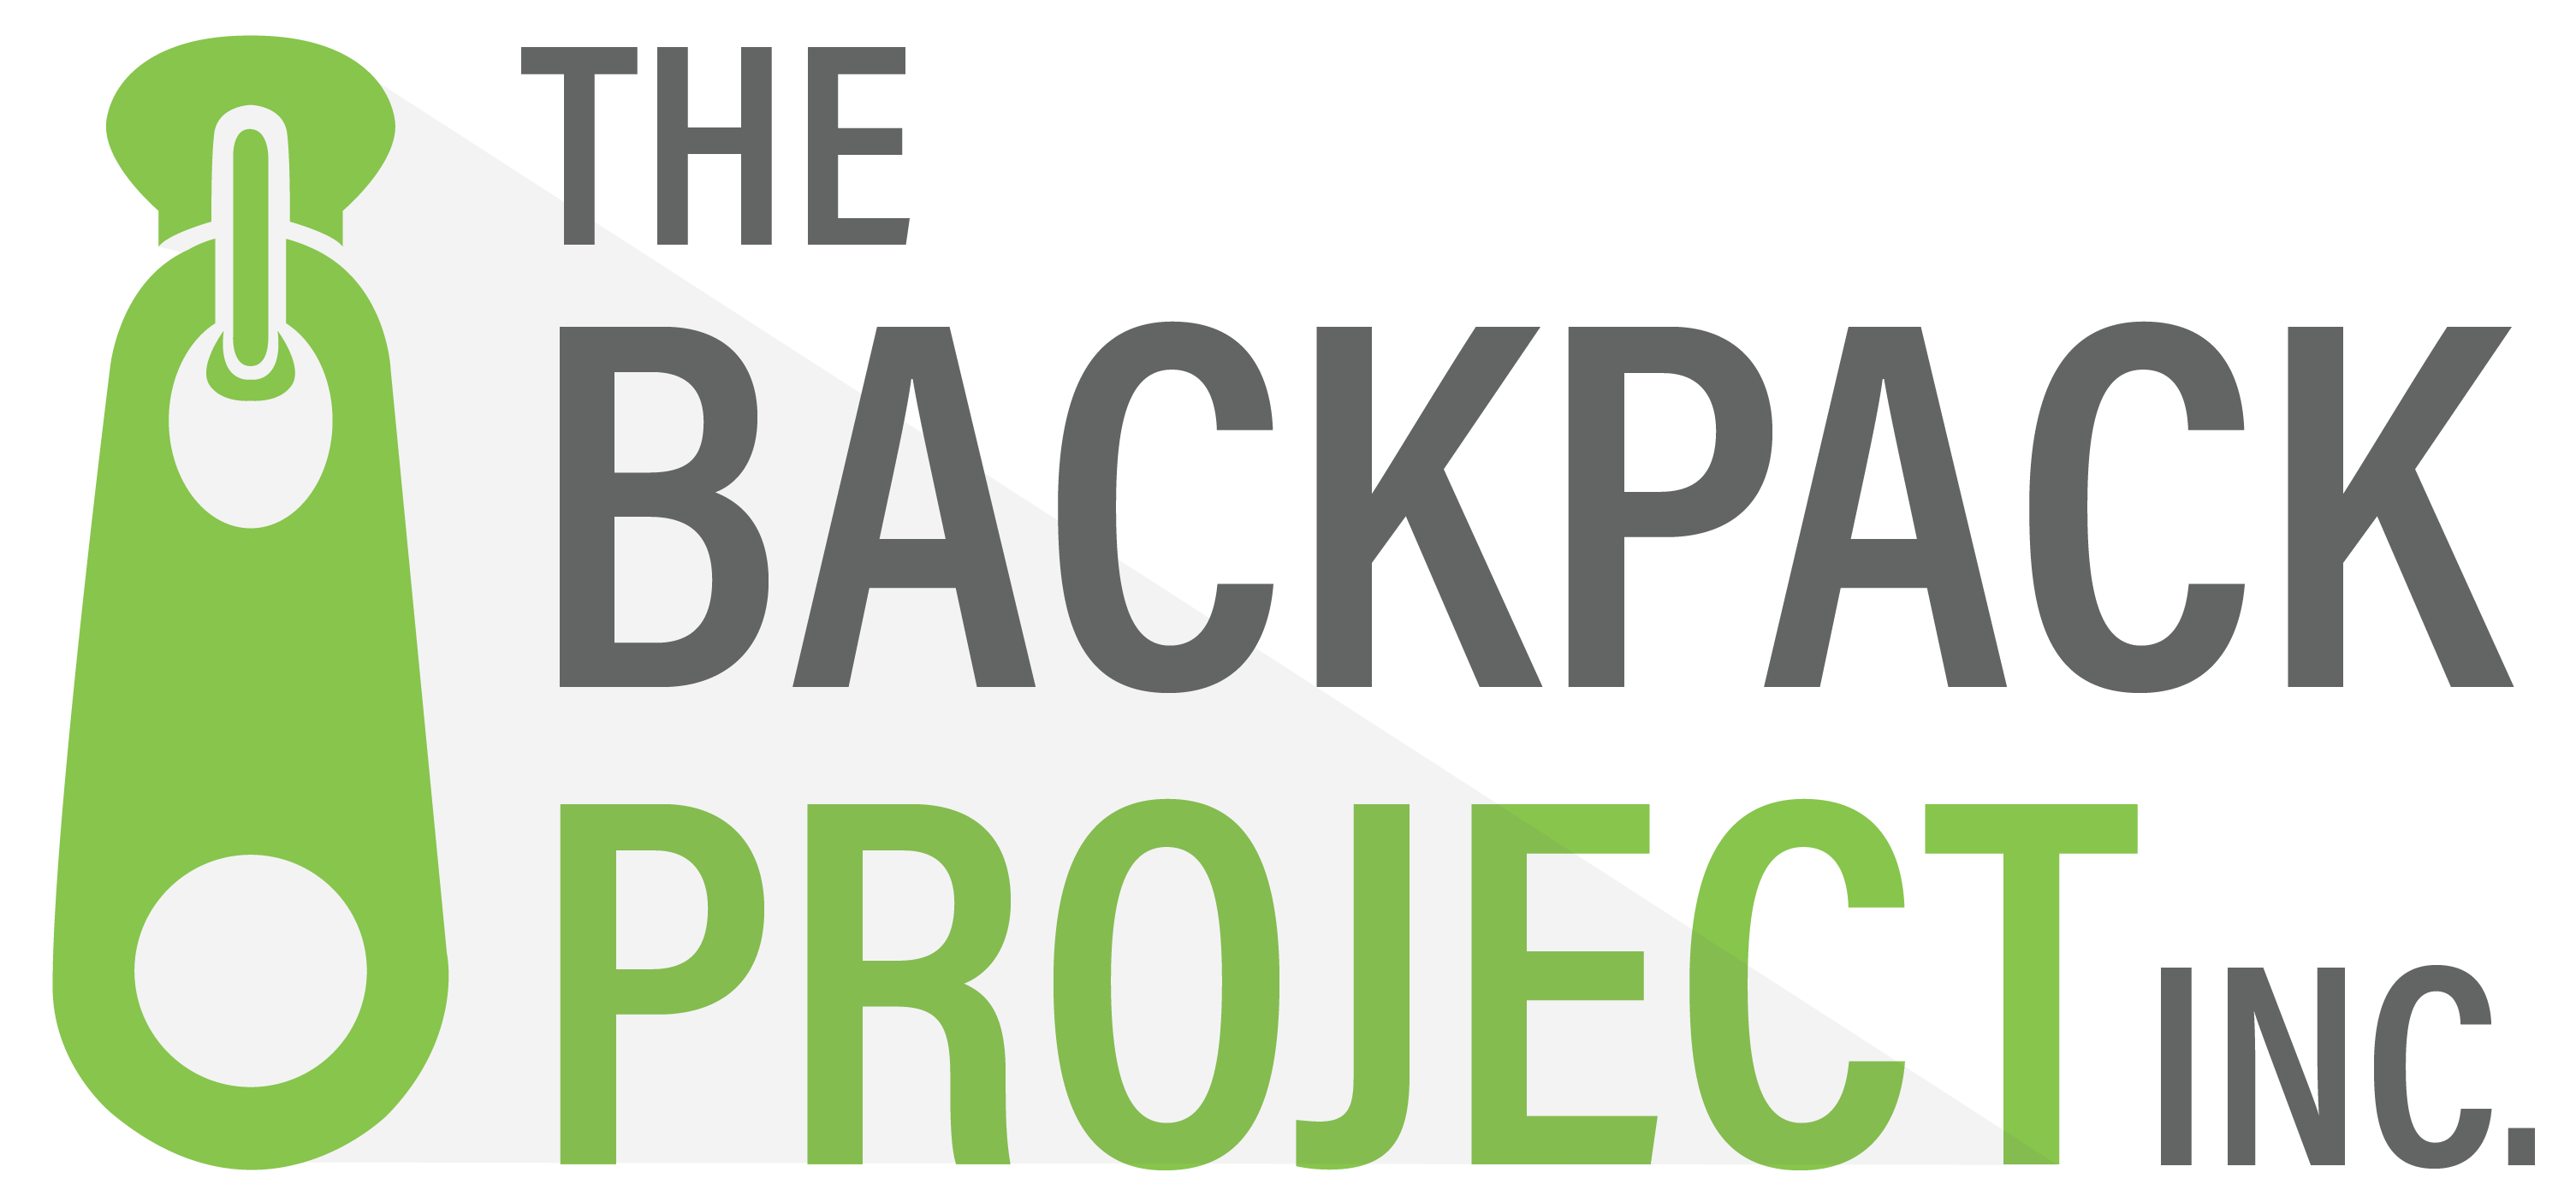 The Backpack Project Logo